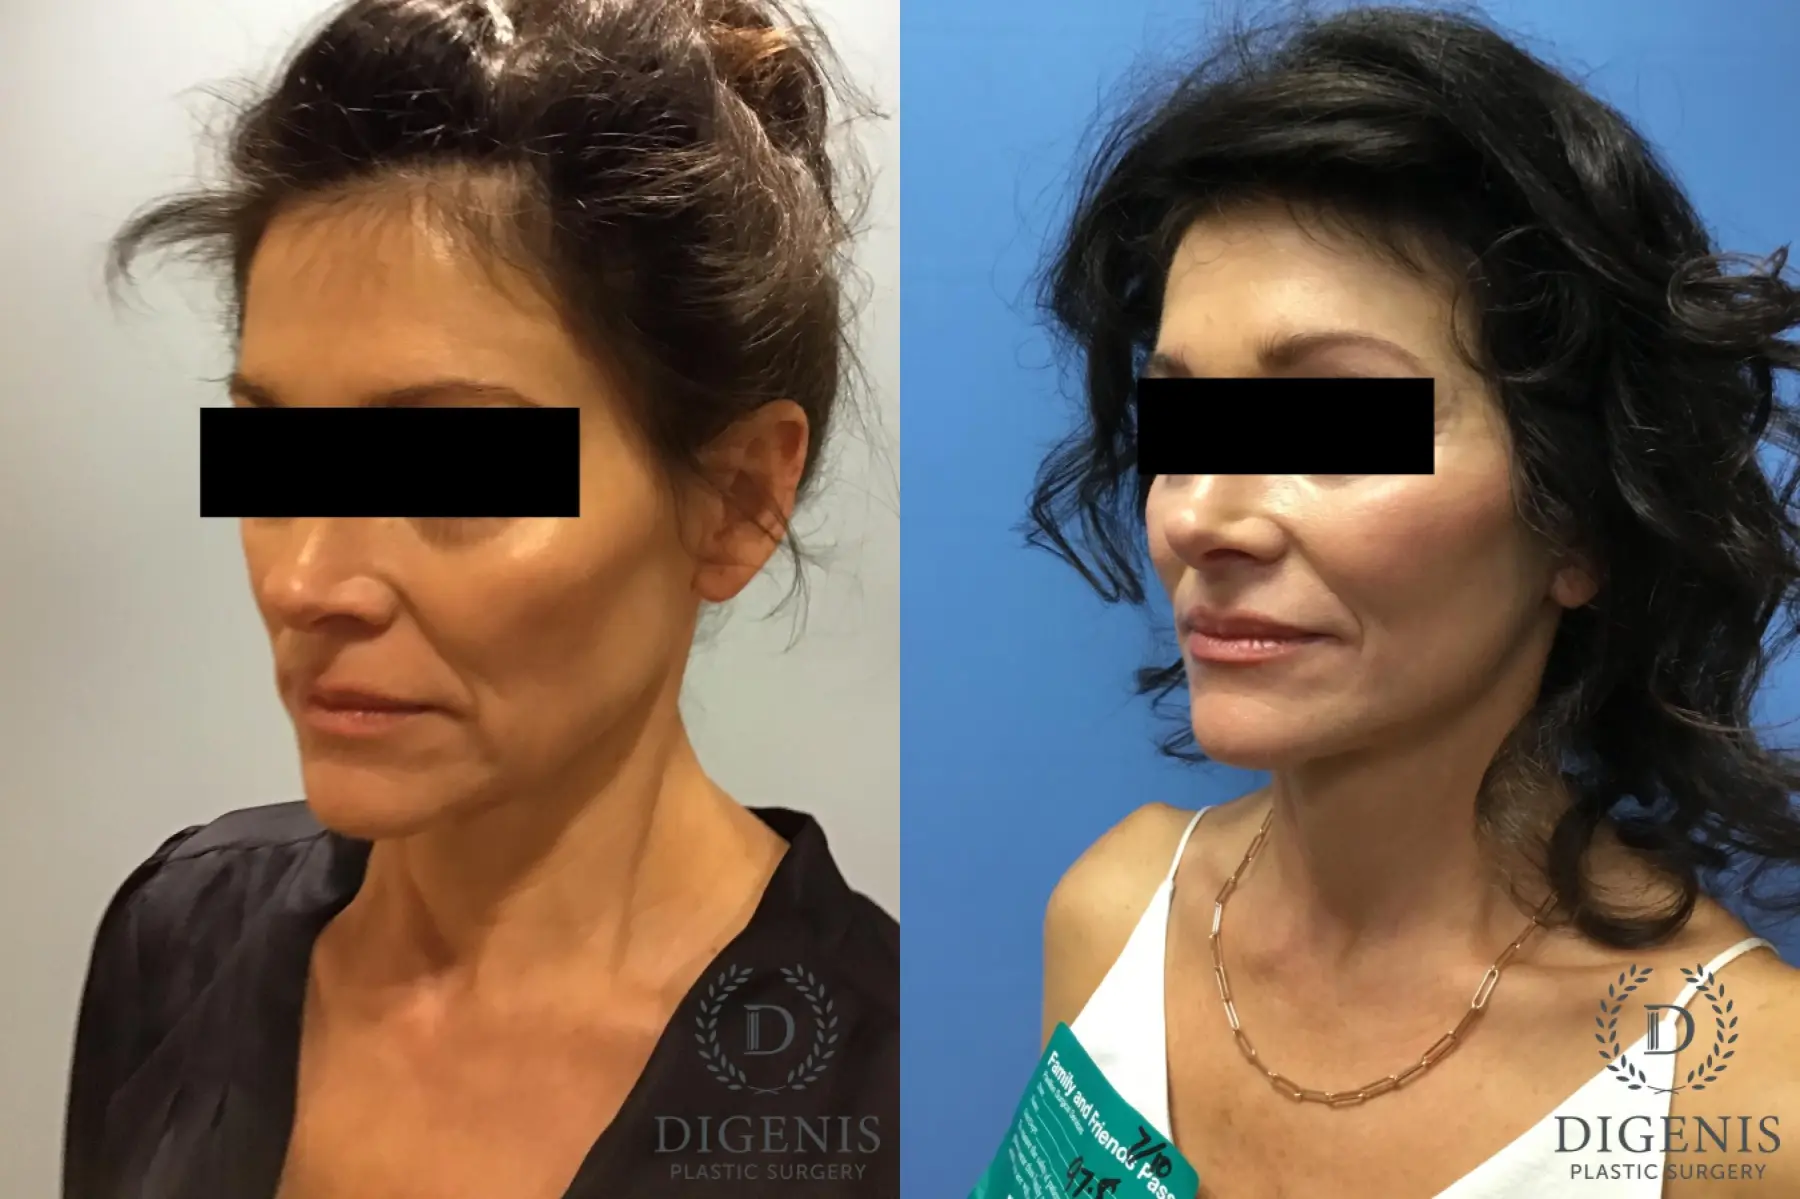 Facelift: Patient 9 - Before and After 2